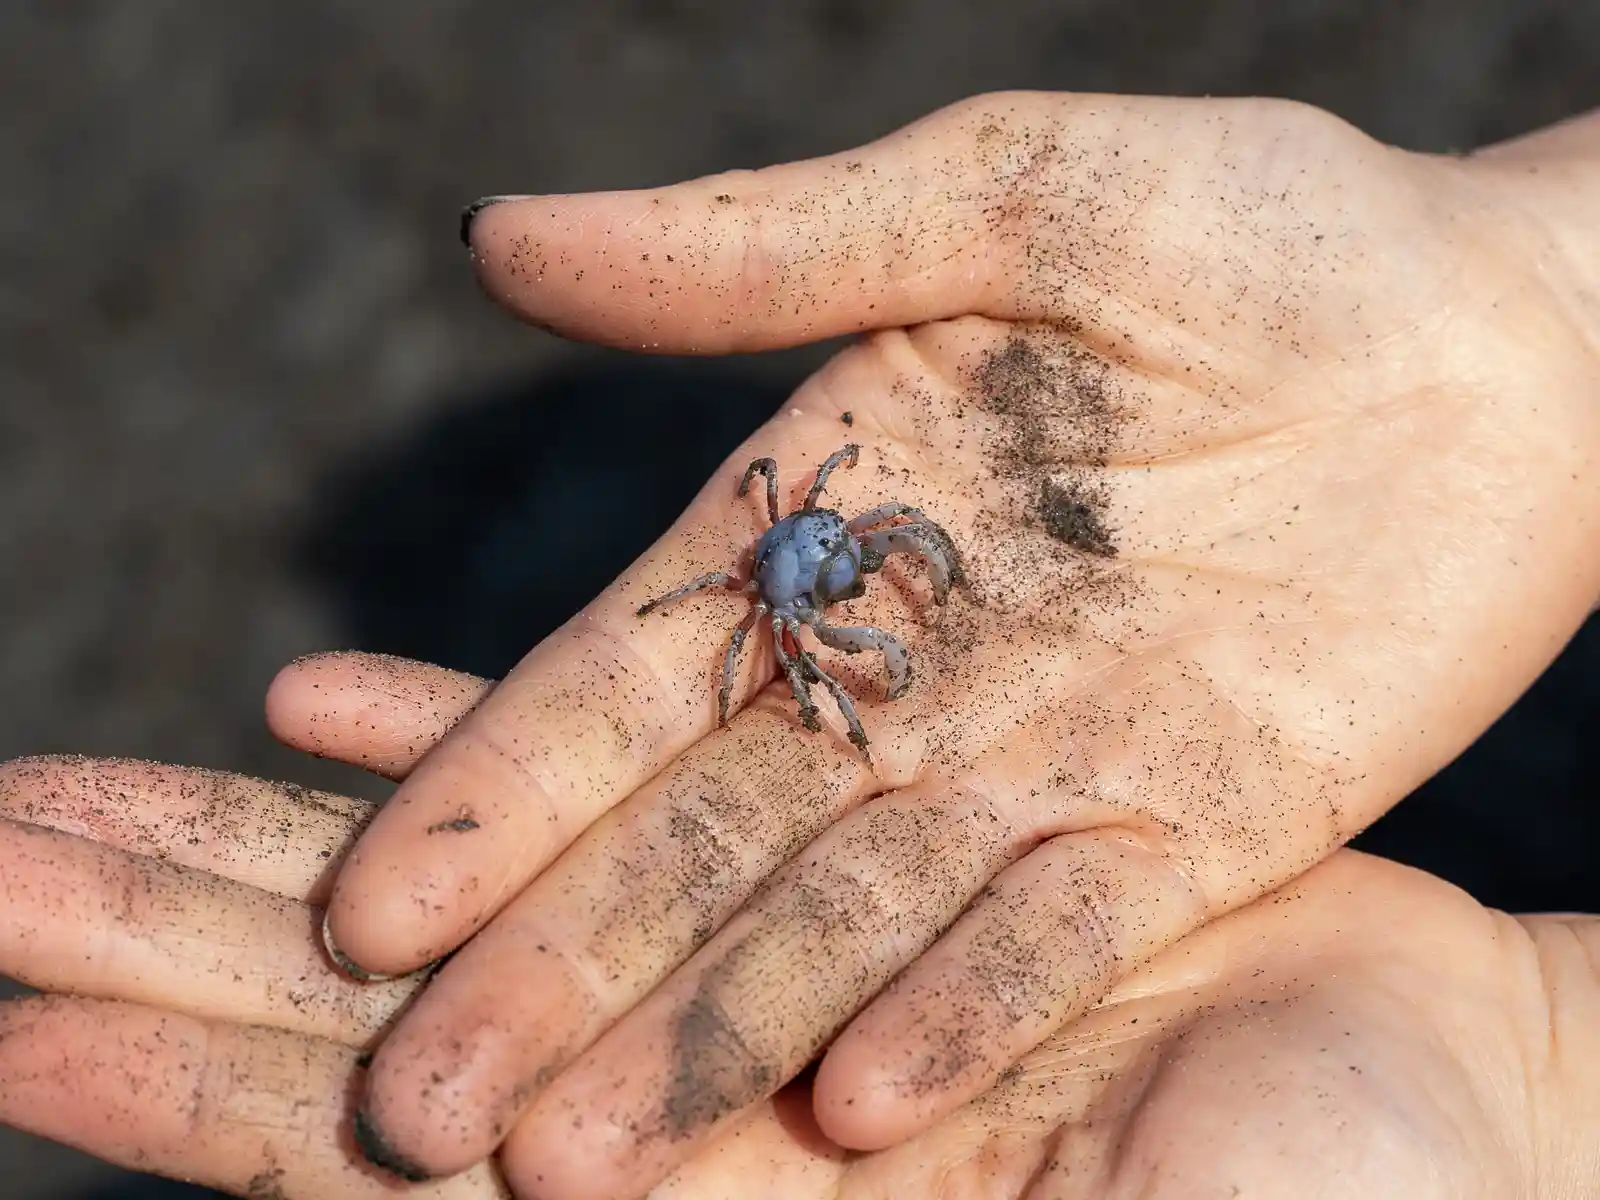 A small purple crab the size of a dime is held in a person's hand.